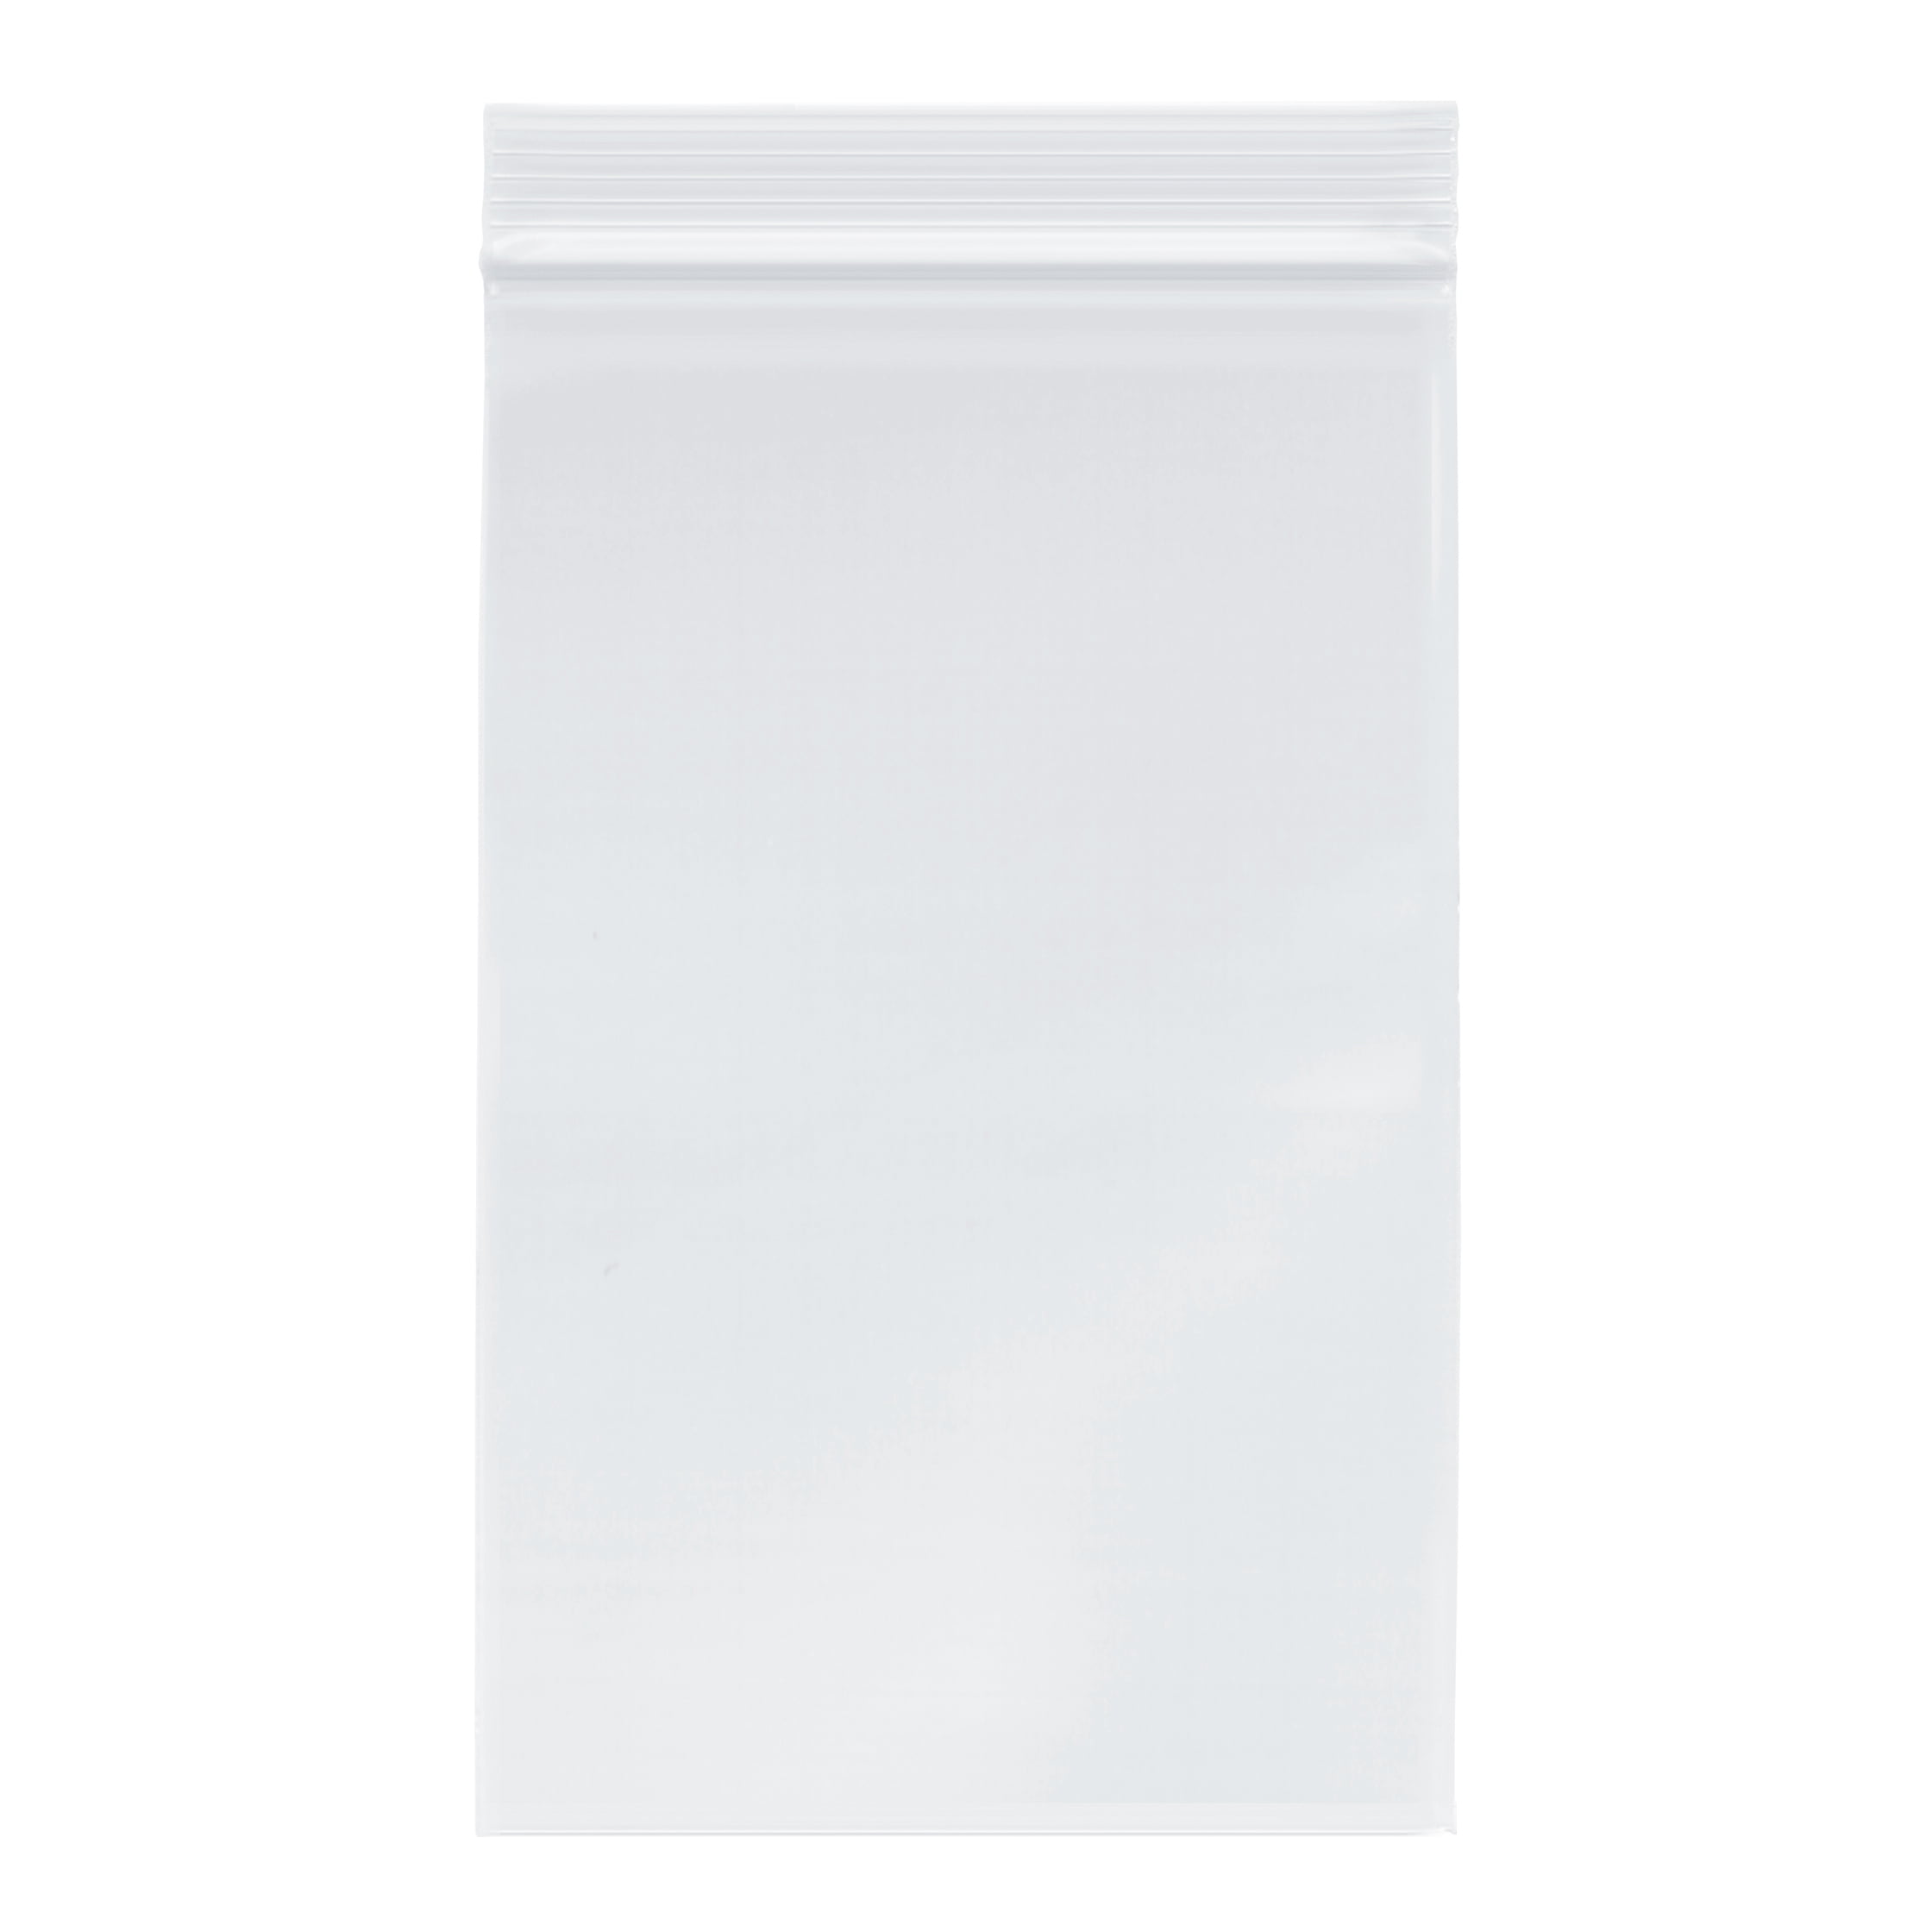 Plymor 2 Mil Clear Brand Zipper Reclosable Storage Bags 3 x 5 Case of 1000 